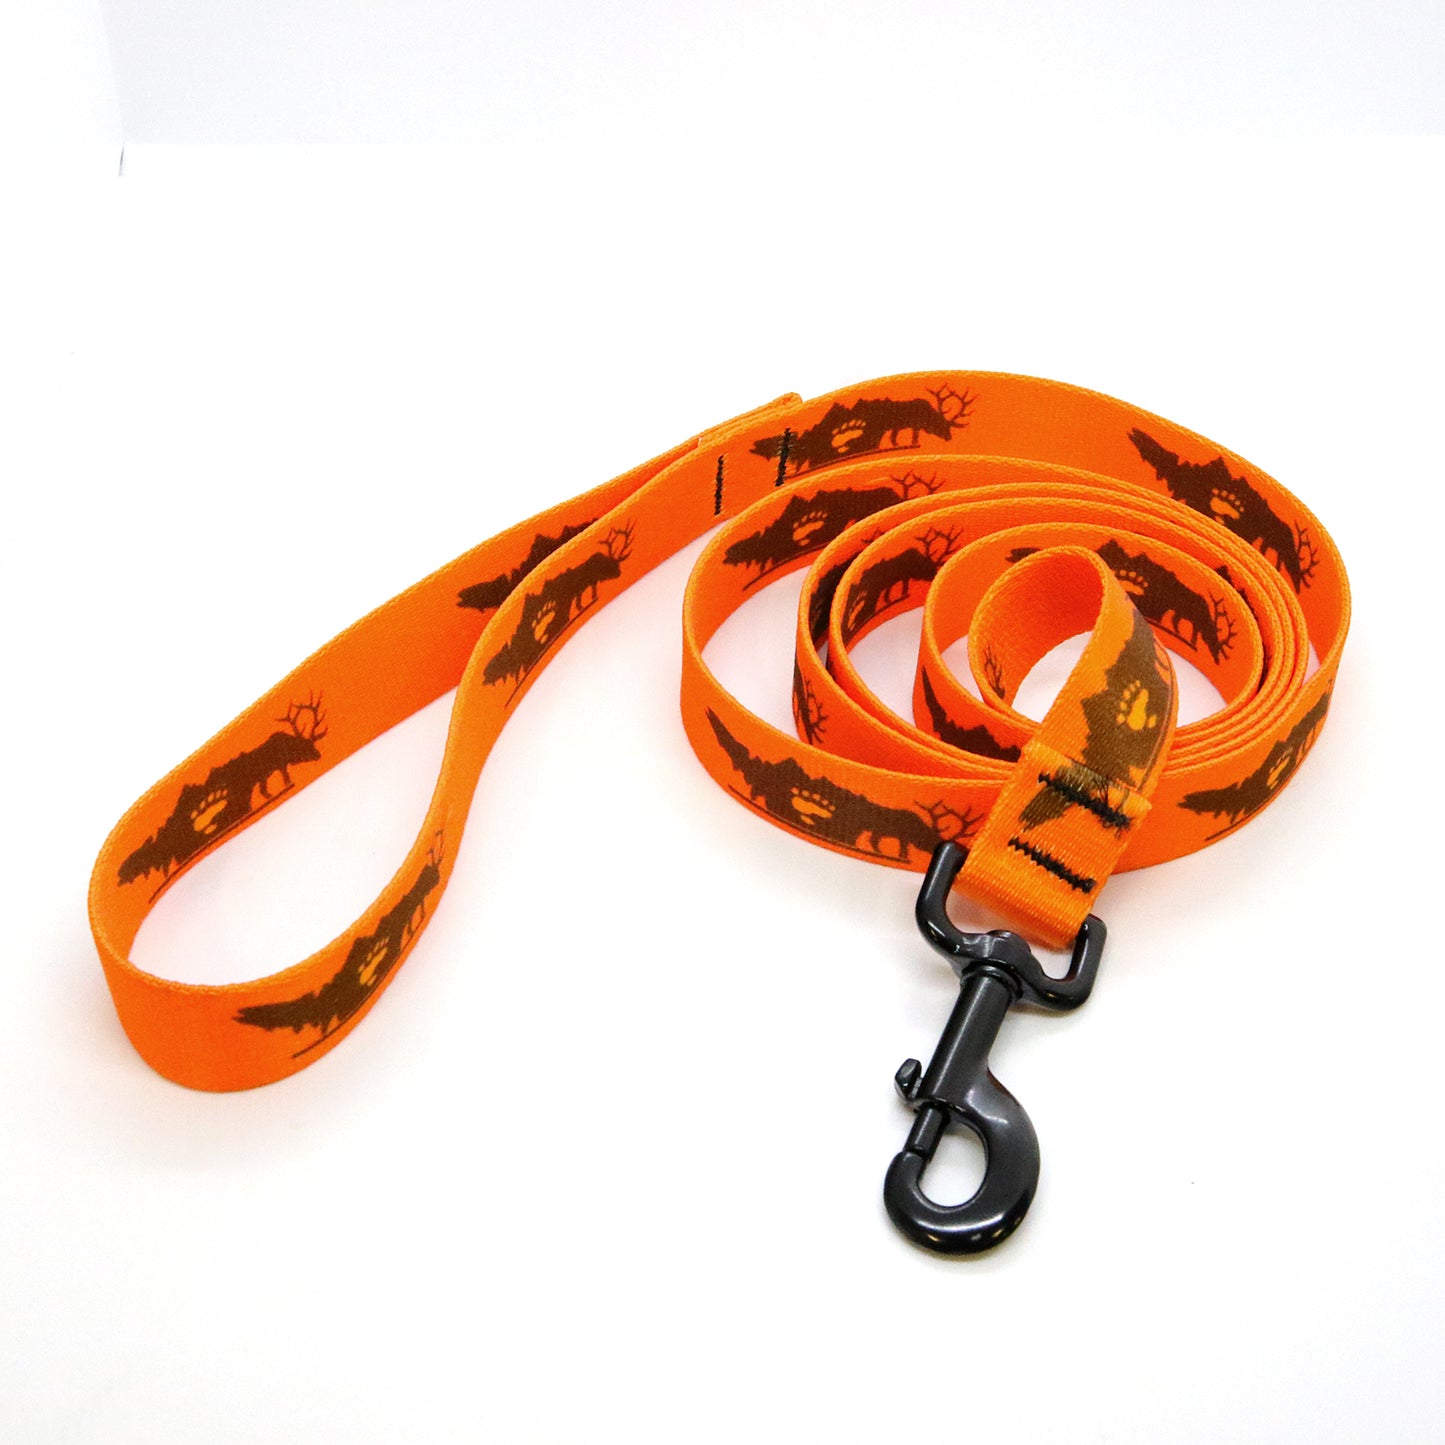 An orange dog leash with a design of a trout bear paw and elk is shown